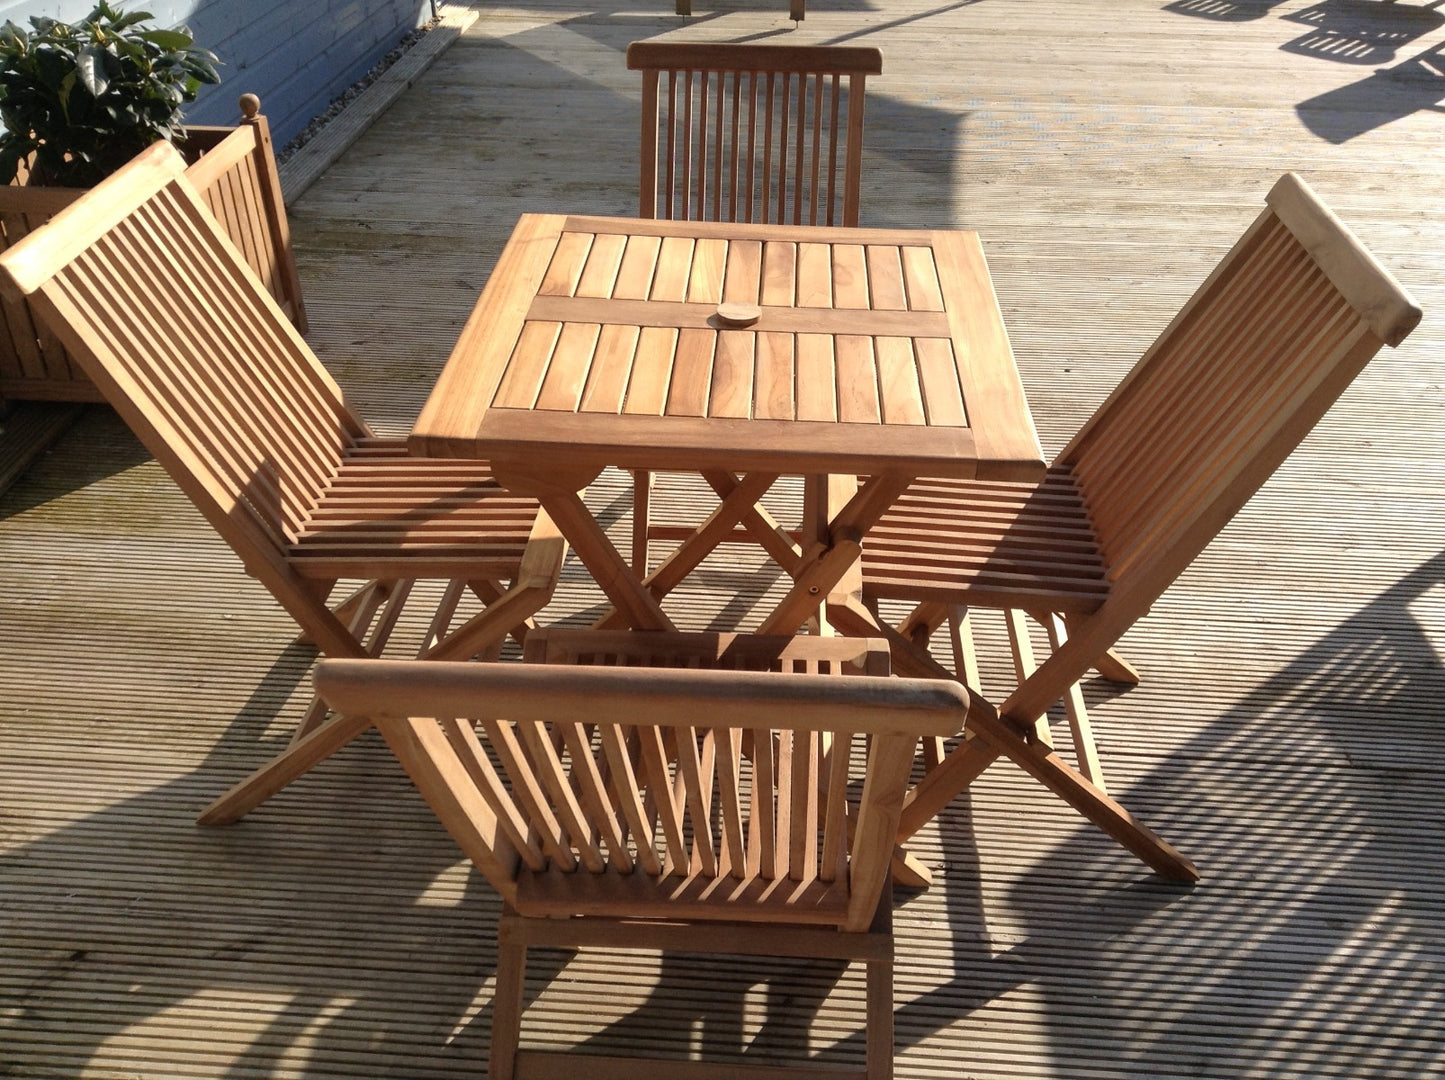 4 Seater Square Folding Teak Set with Classic Folding Chairs